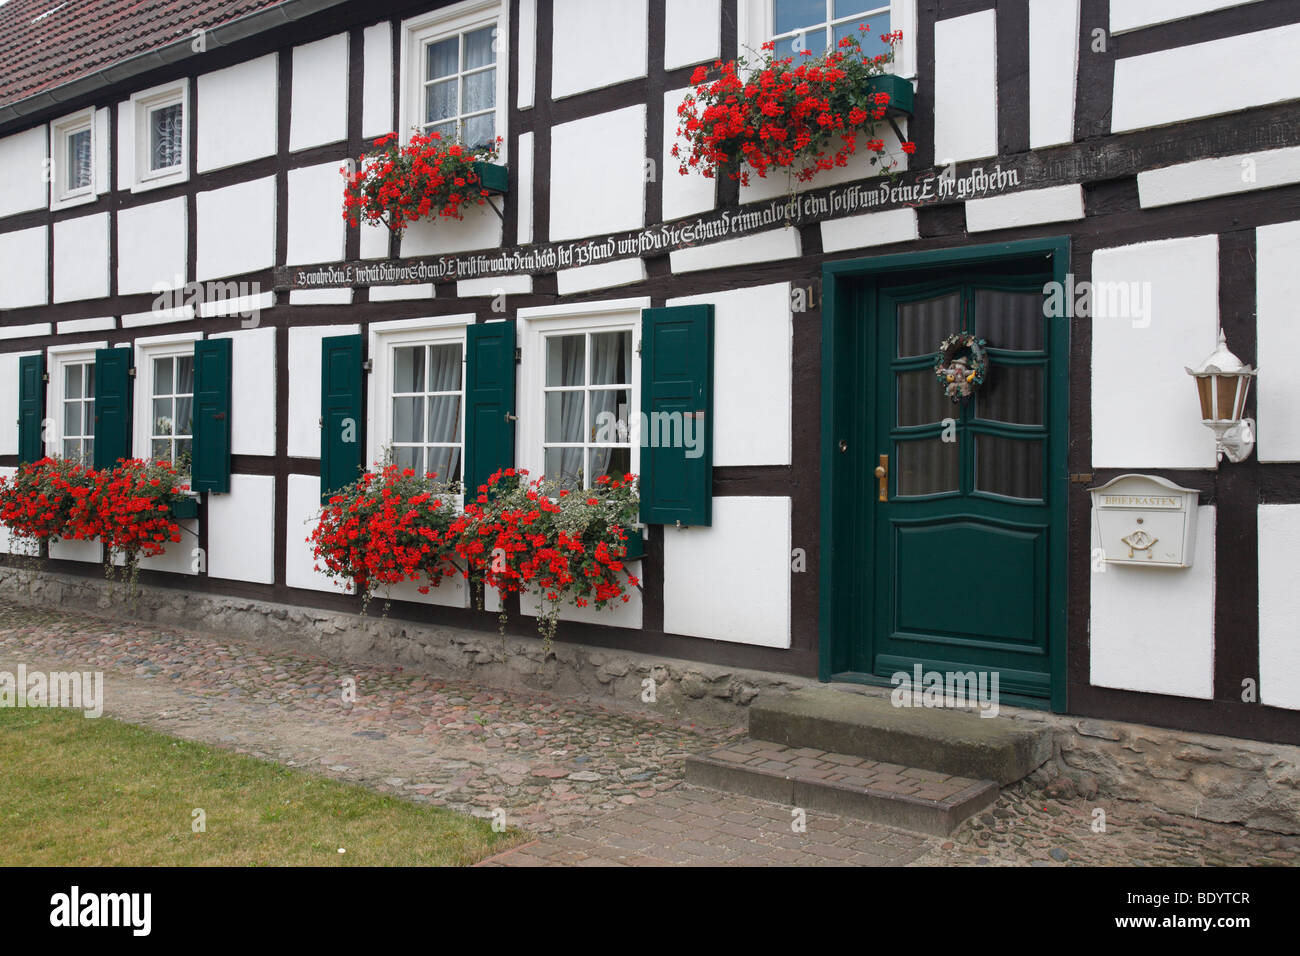 crane's bill in flower boxes at windows of a frame house; Bellingen in Saxony-Anhalt, Germany Stock Photo